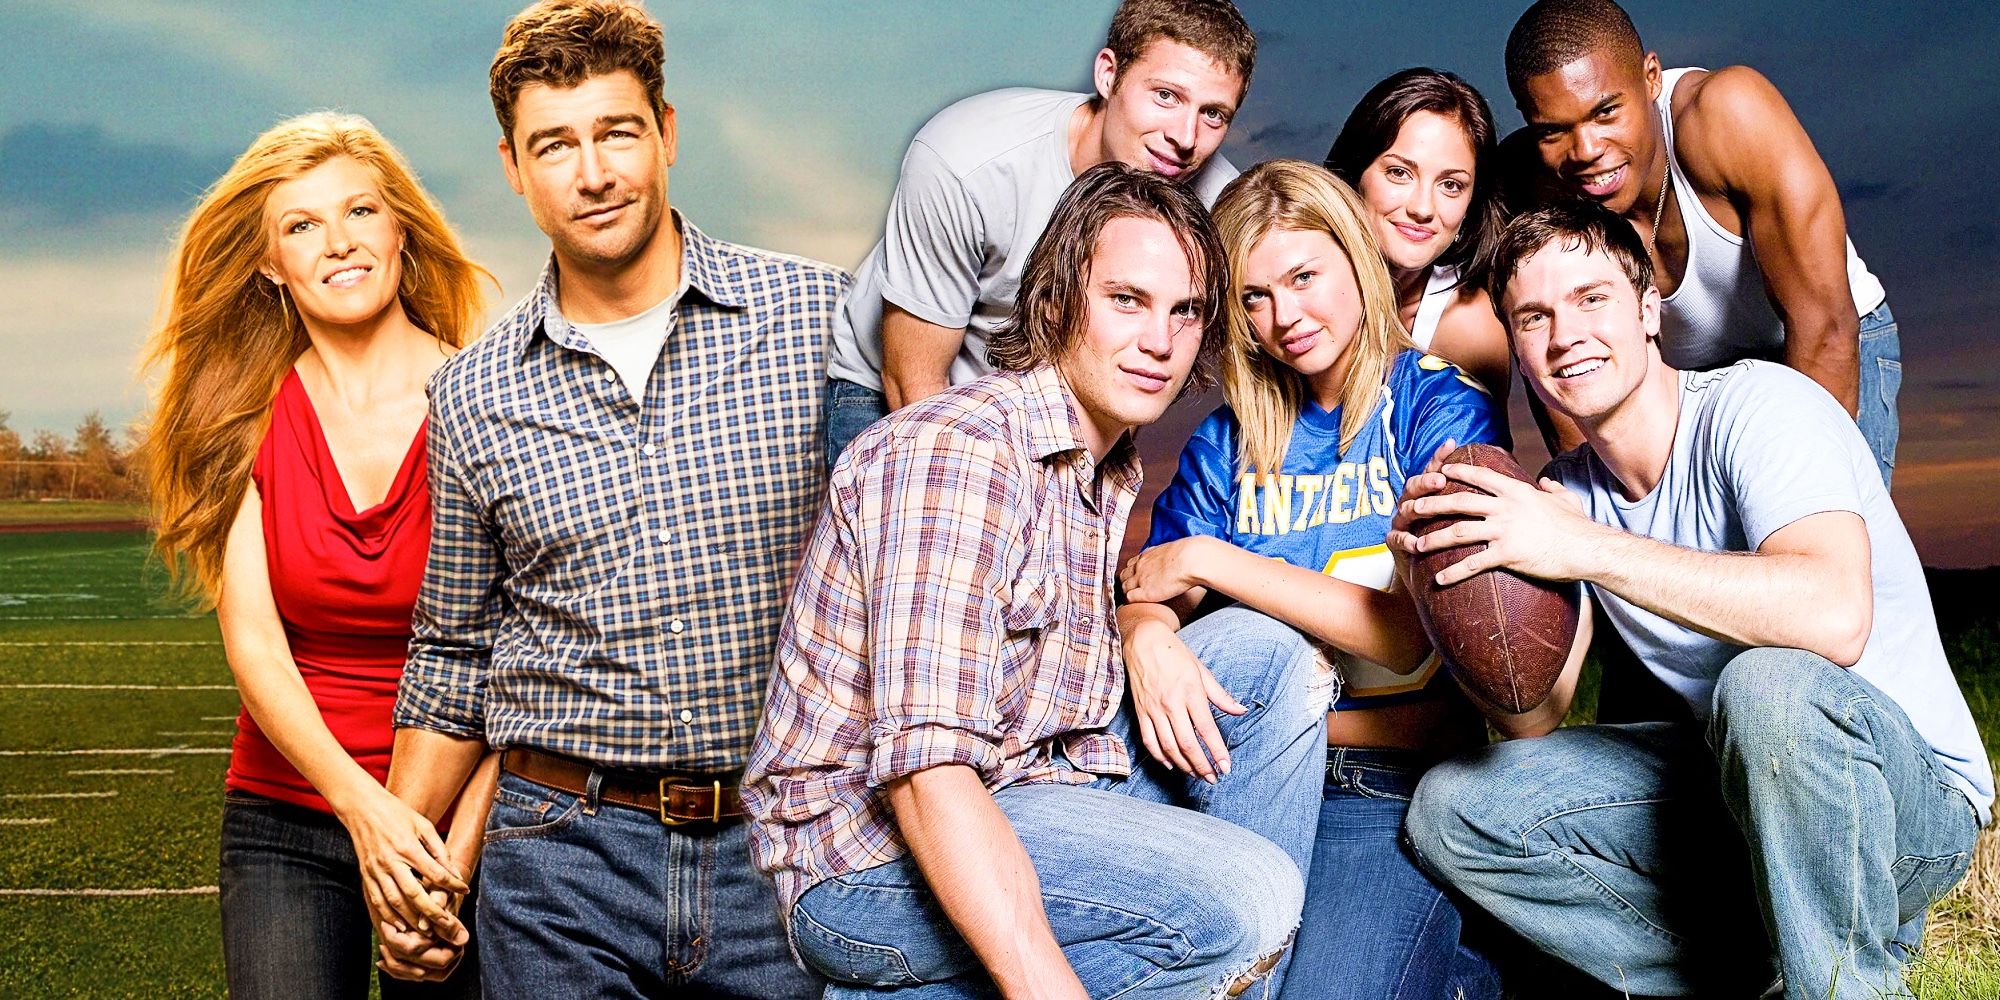 Quadriplegic characters are well developed and accurately portrayed in Friday  Night Lights. – Friday Night Lights